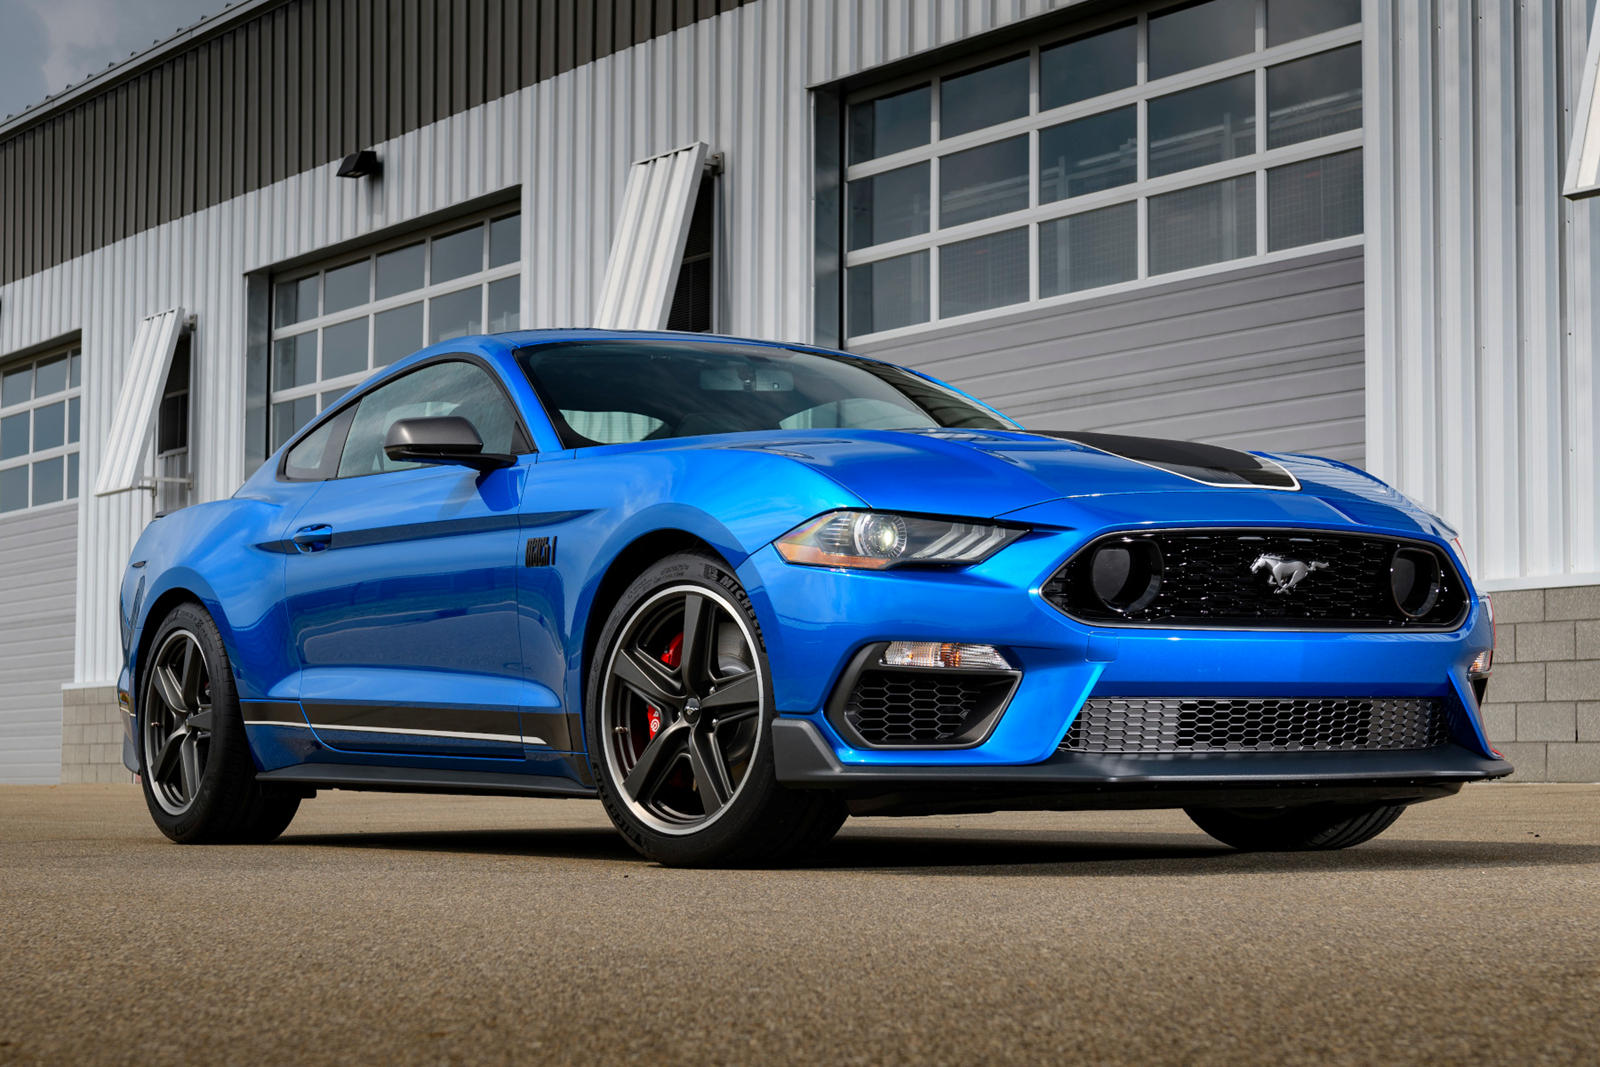 2022 Ford Mustang Coupe: Latest Prices, Reviews, Specs, Photos and